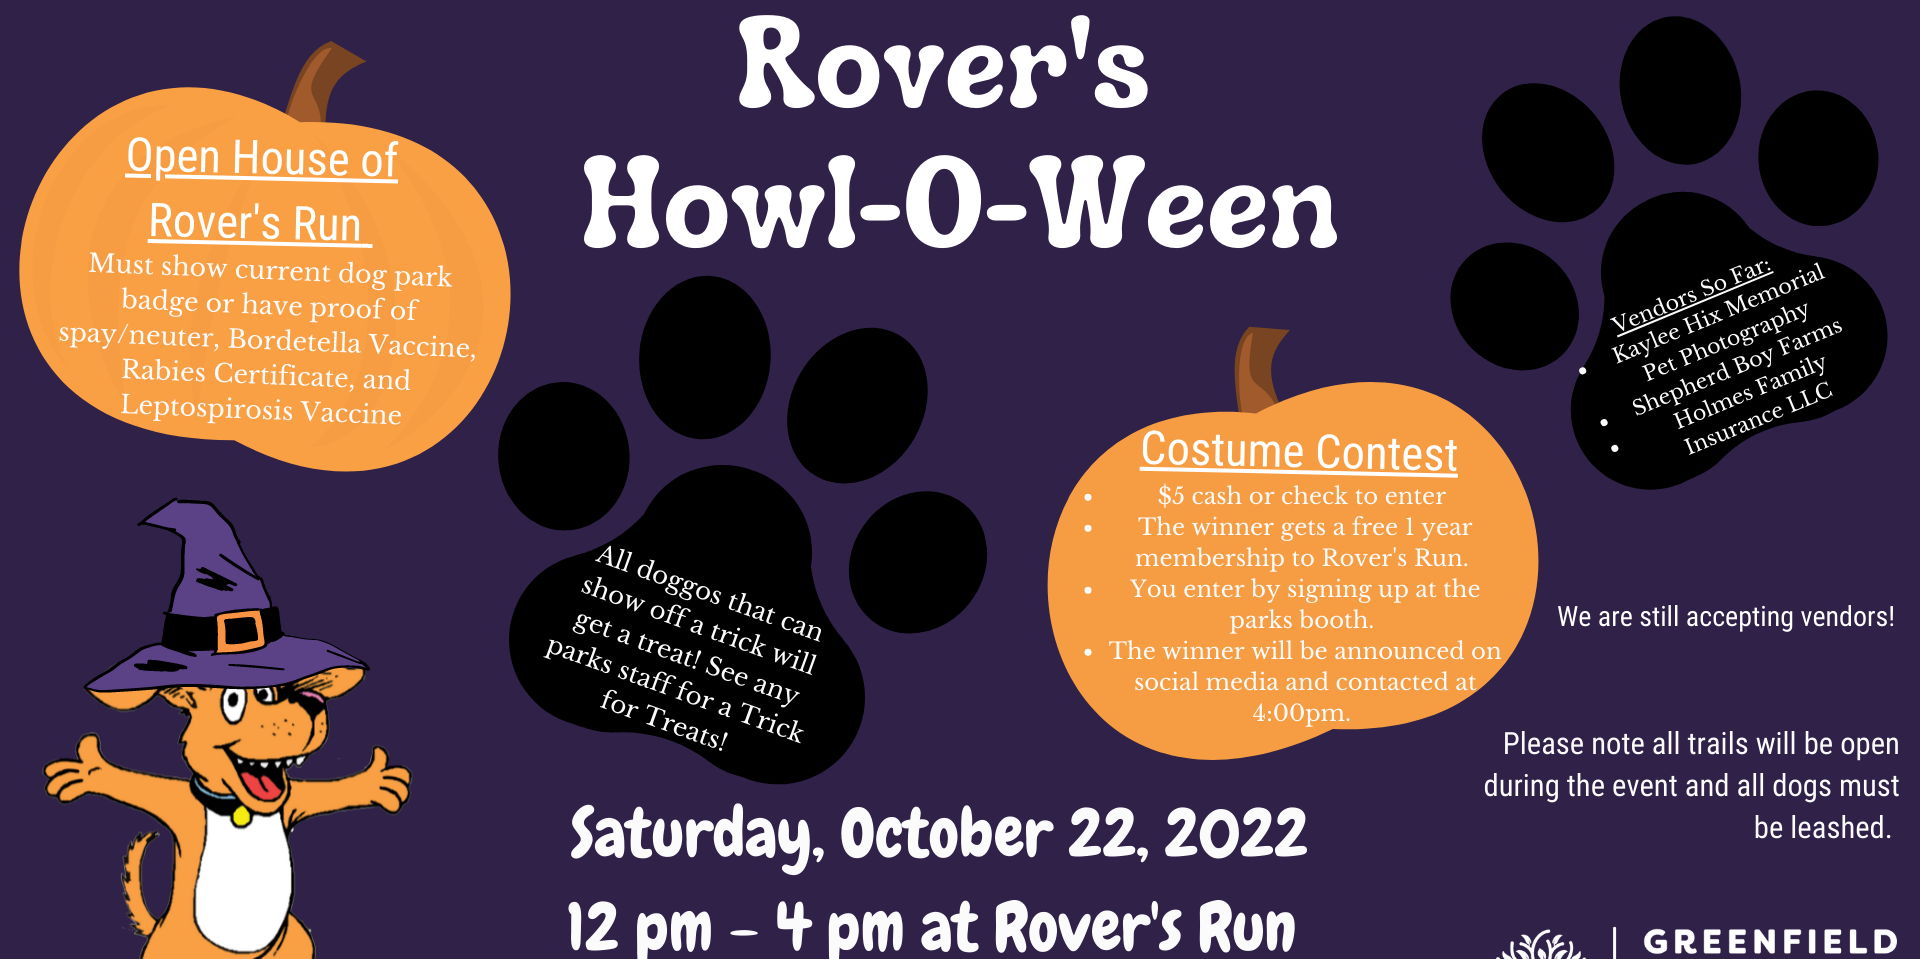 Rover's Howl- O - Ween  promotional image